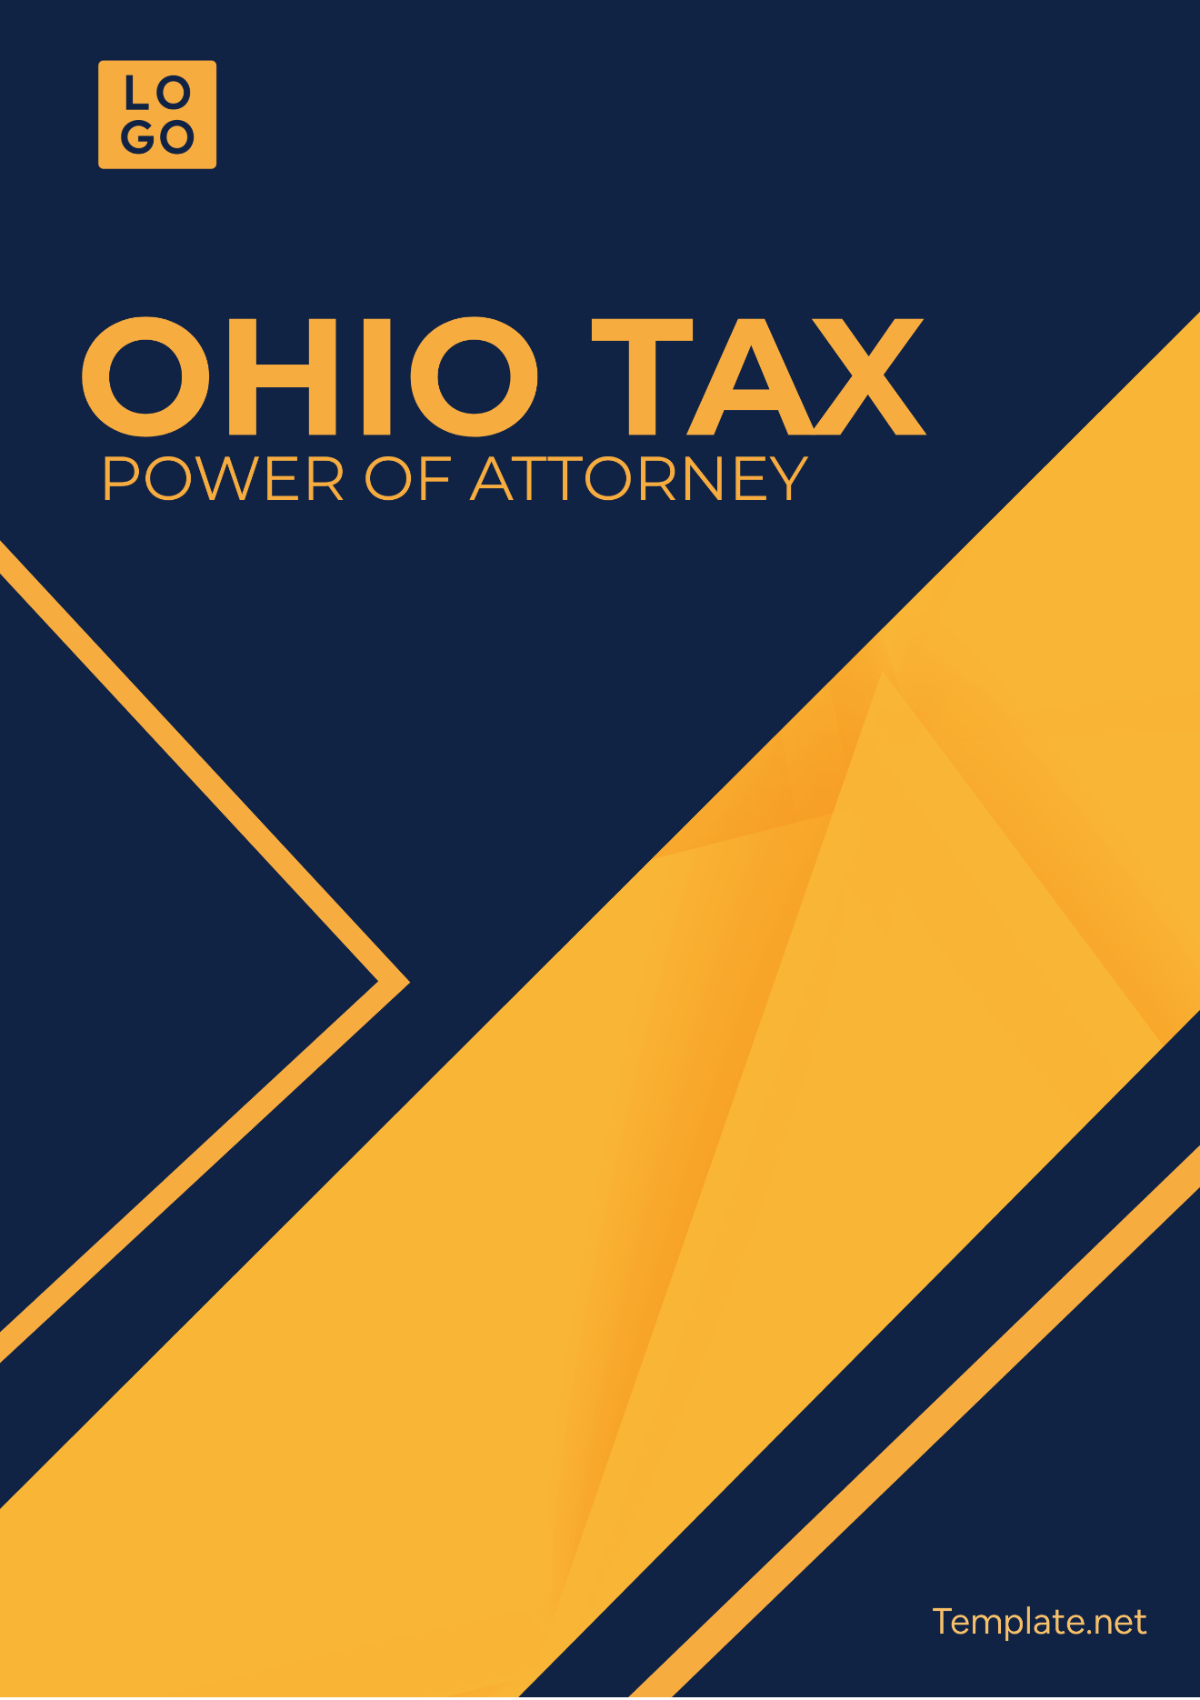 Ohio Tax Power of Attorney Template